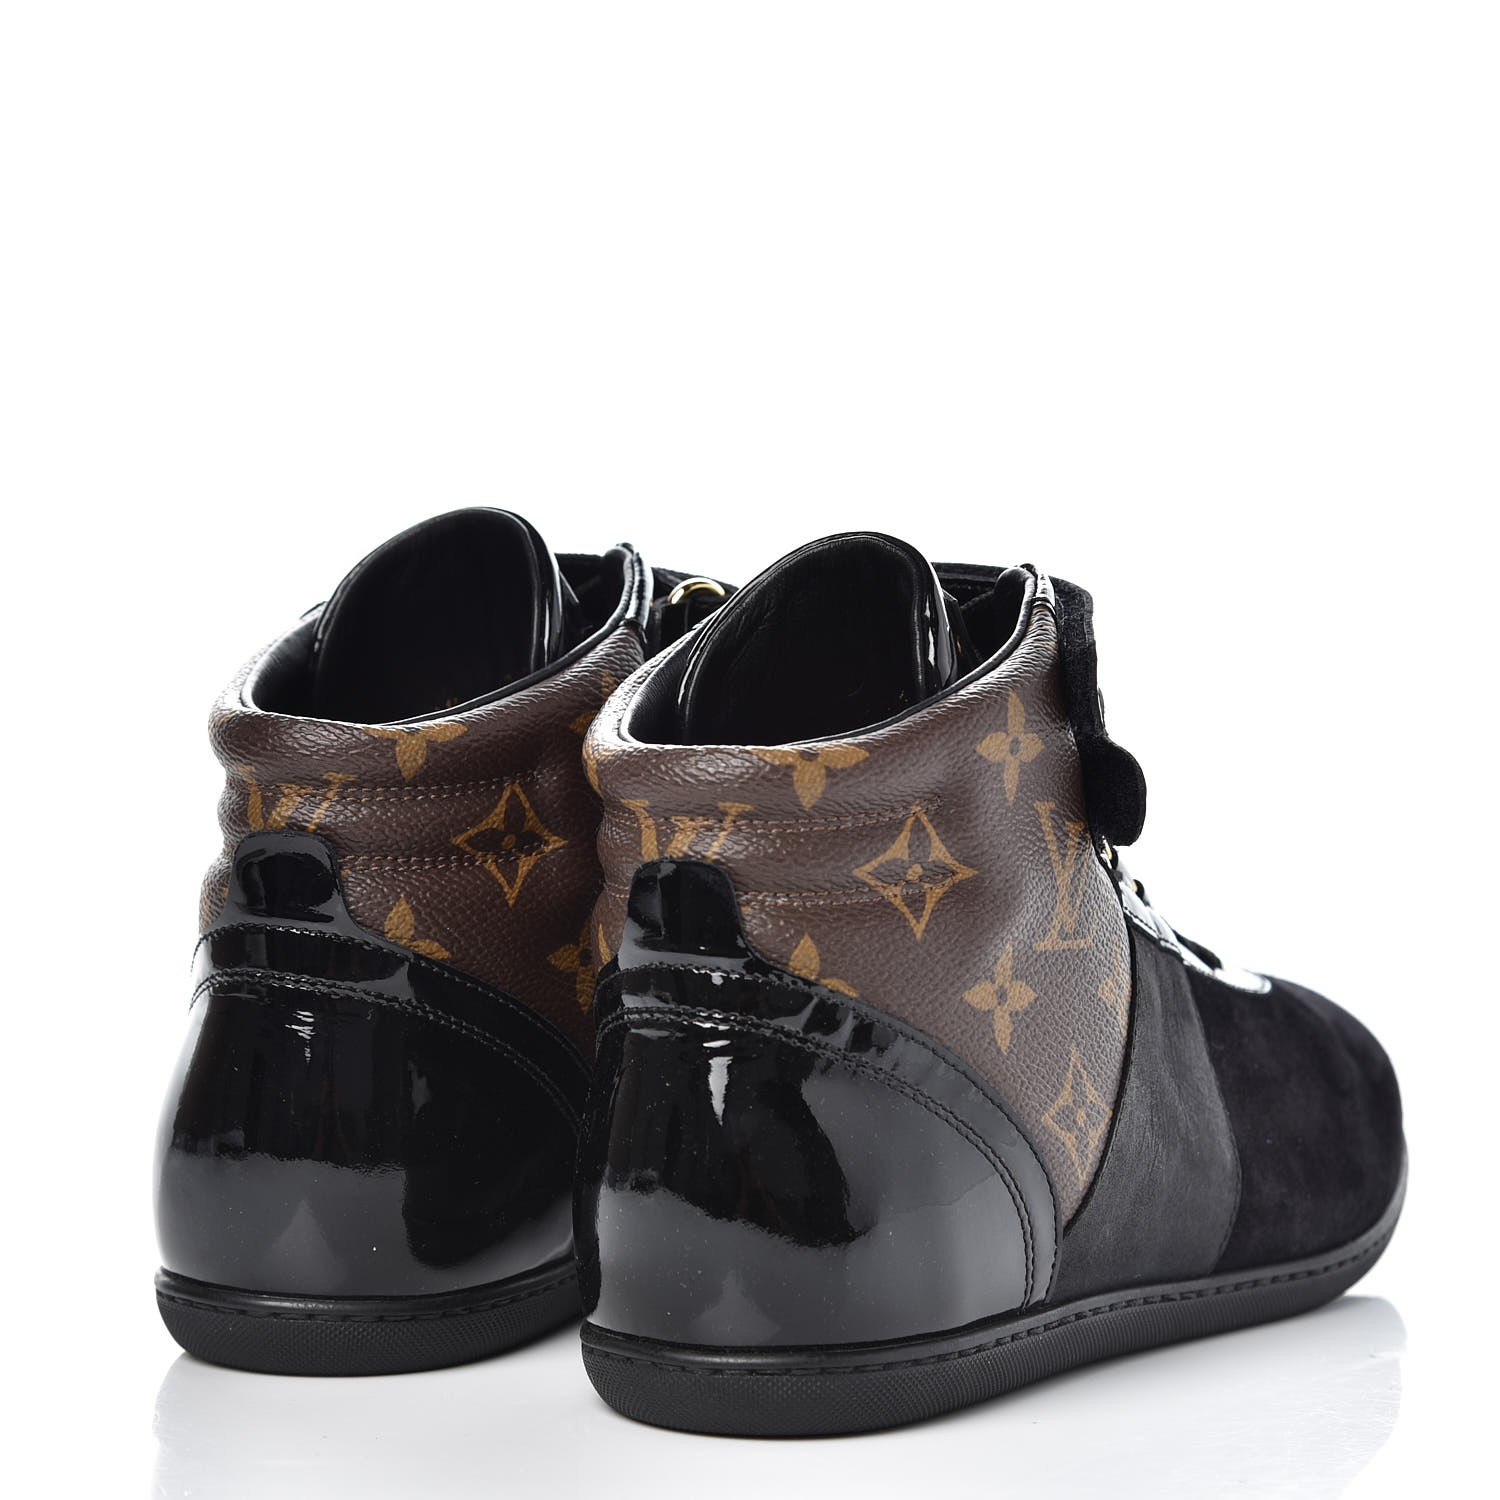 LOUIS VUITTON Monogram Suede Patent Womens Move Up Sneakers 36.5 Black ...